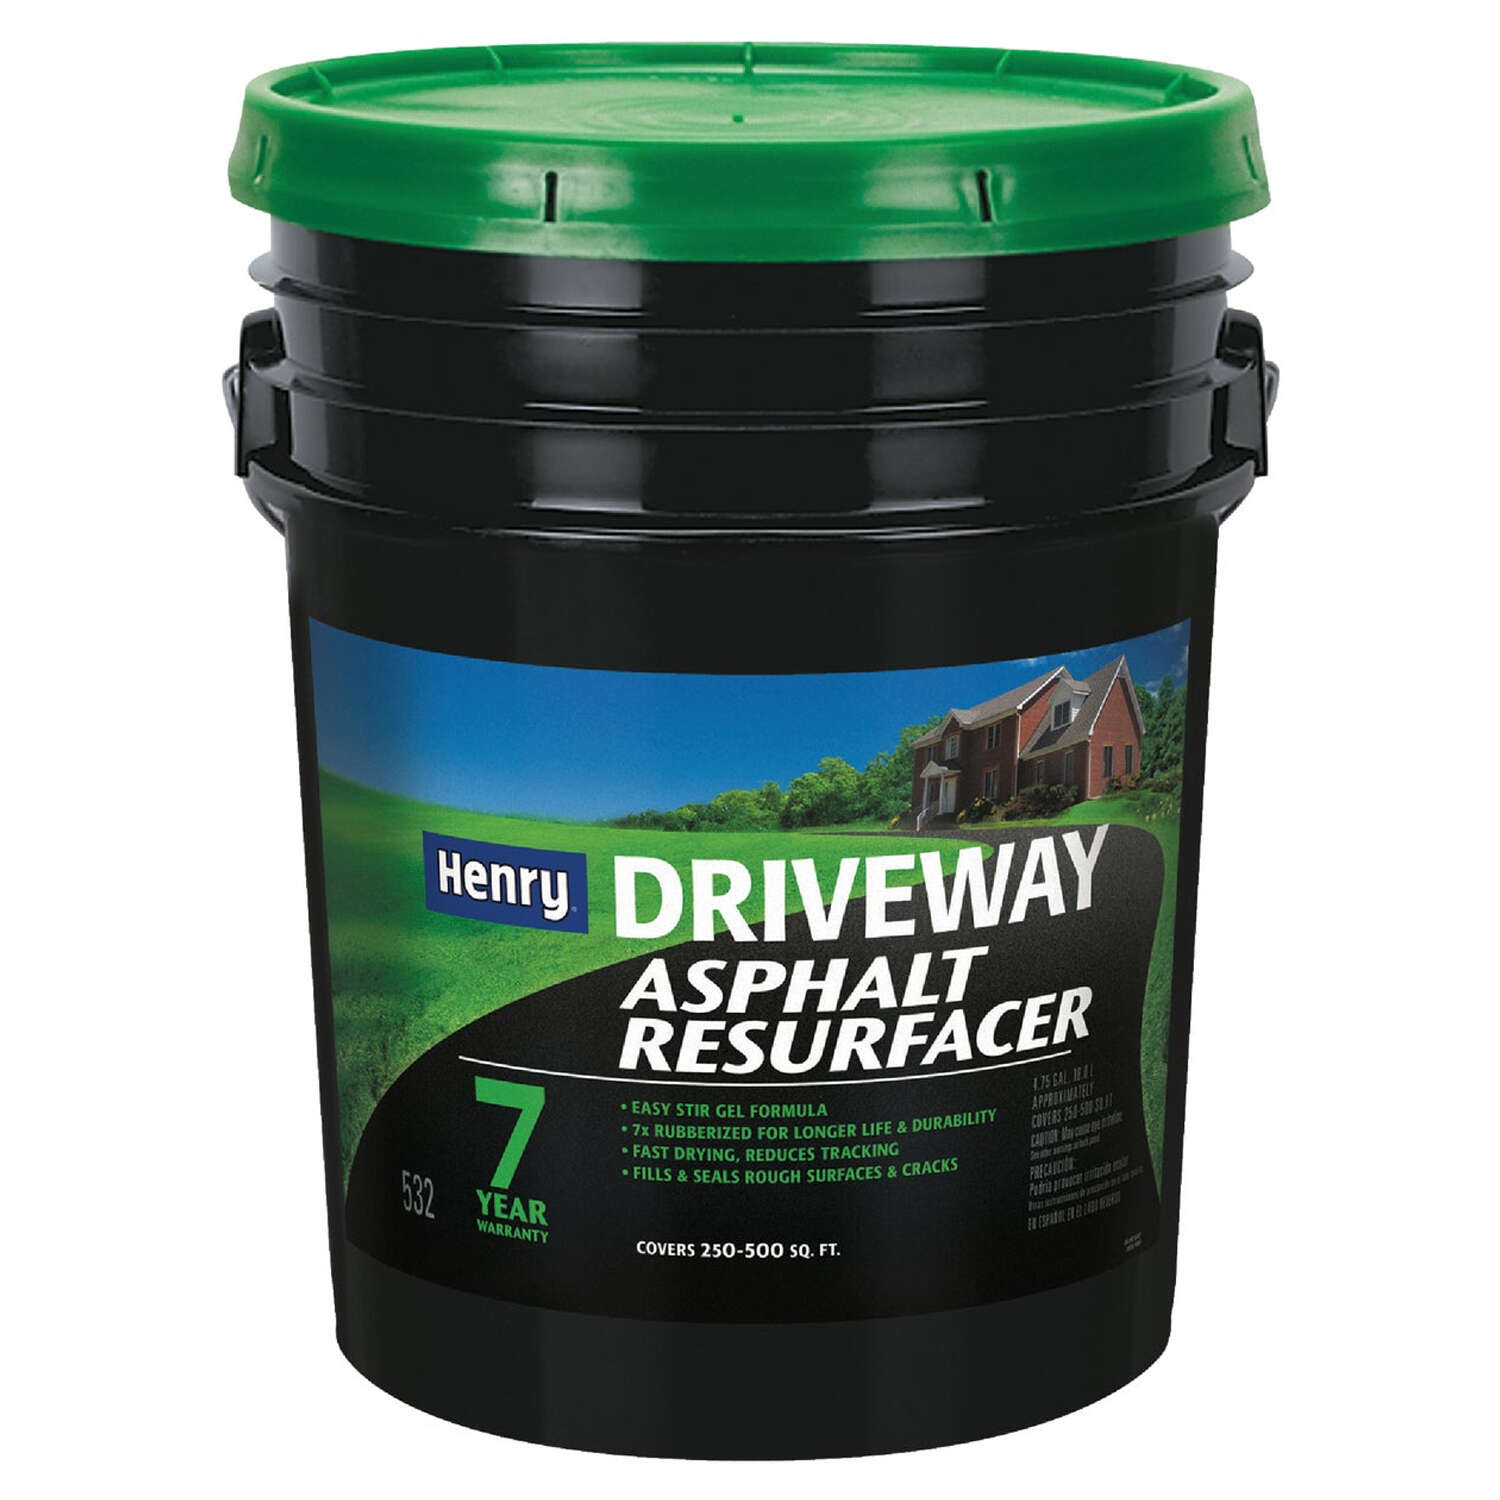 How Much Does A 5-Gallon Bucket Of Driveway Sealer Cost